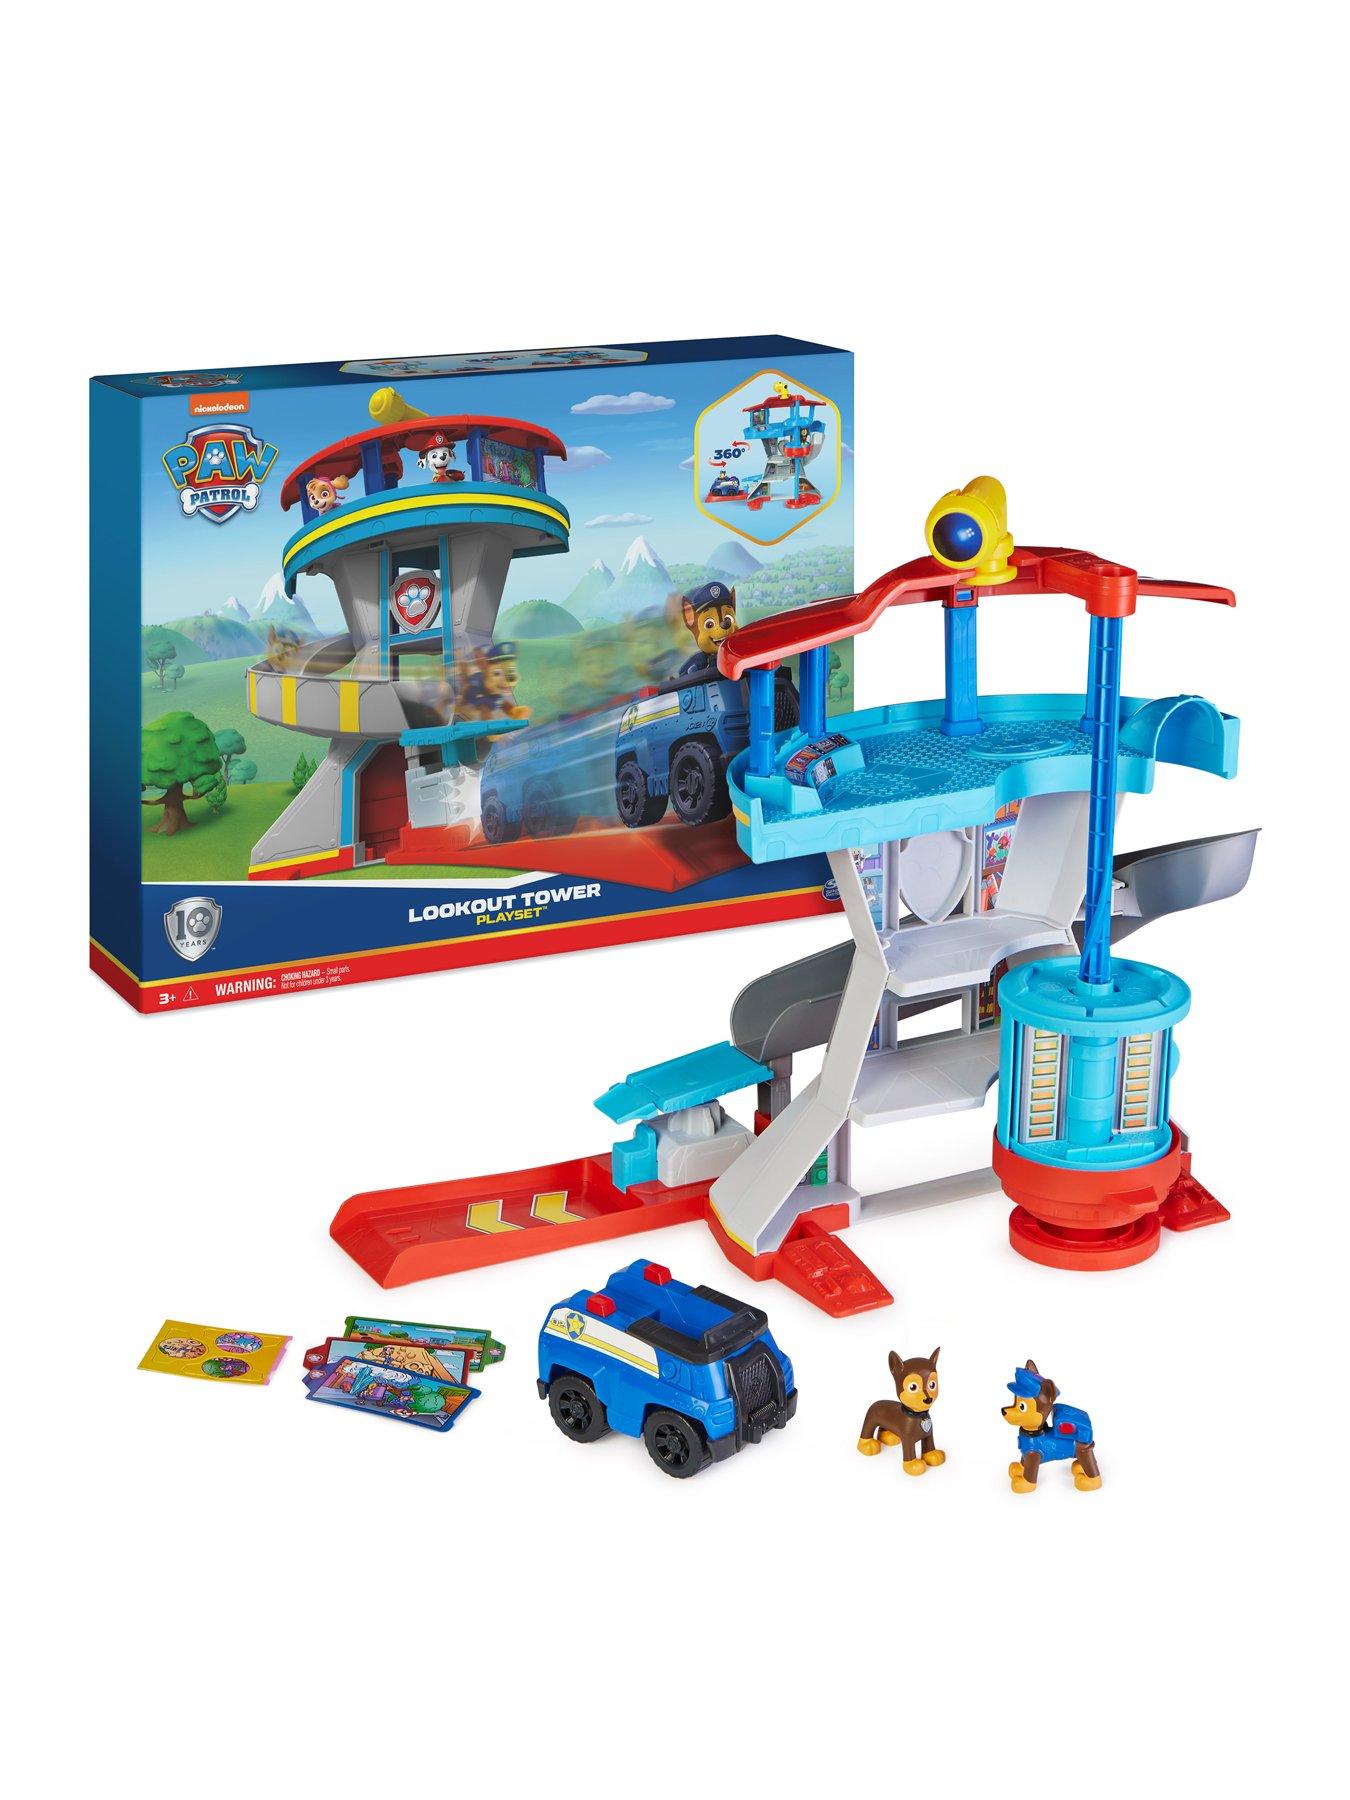 PAW Patrol: The Mighty Movie, Toy Jet Boat with Zuma Mighty Pups Action  Figure, Lights and Sounds, Kids Toys for Boys & Girls 3+